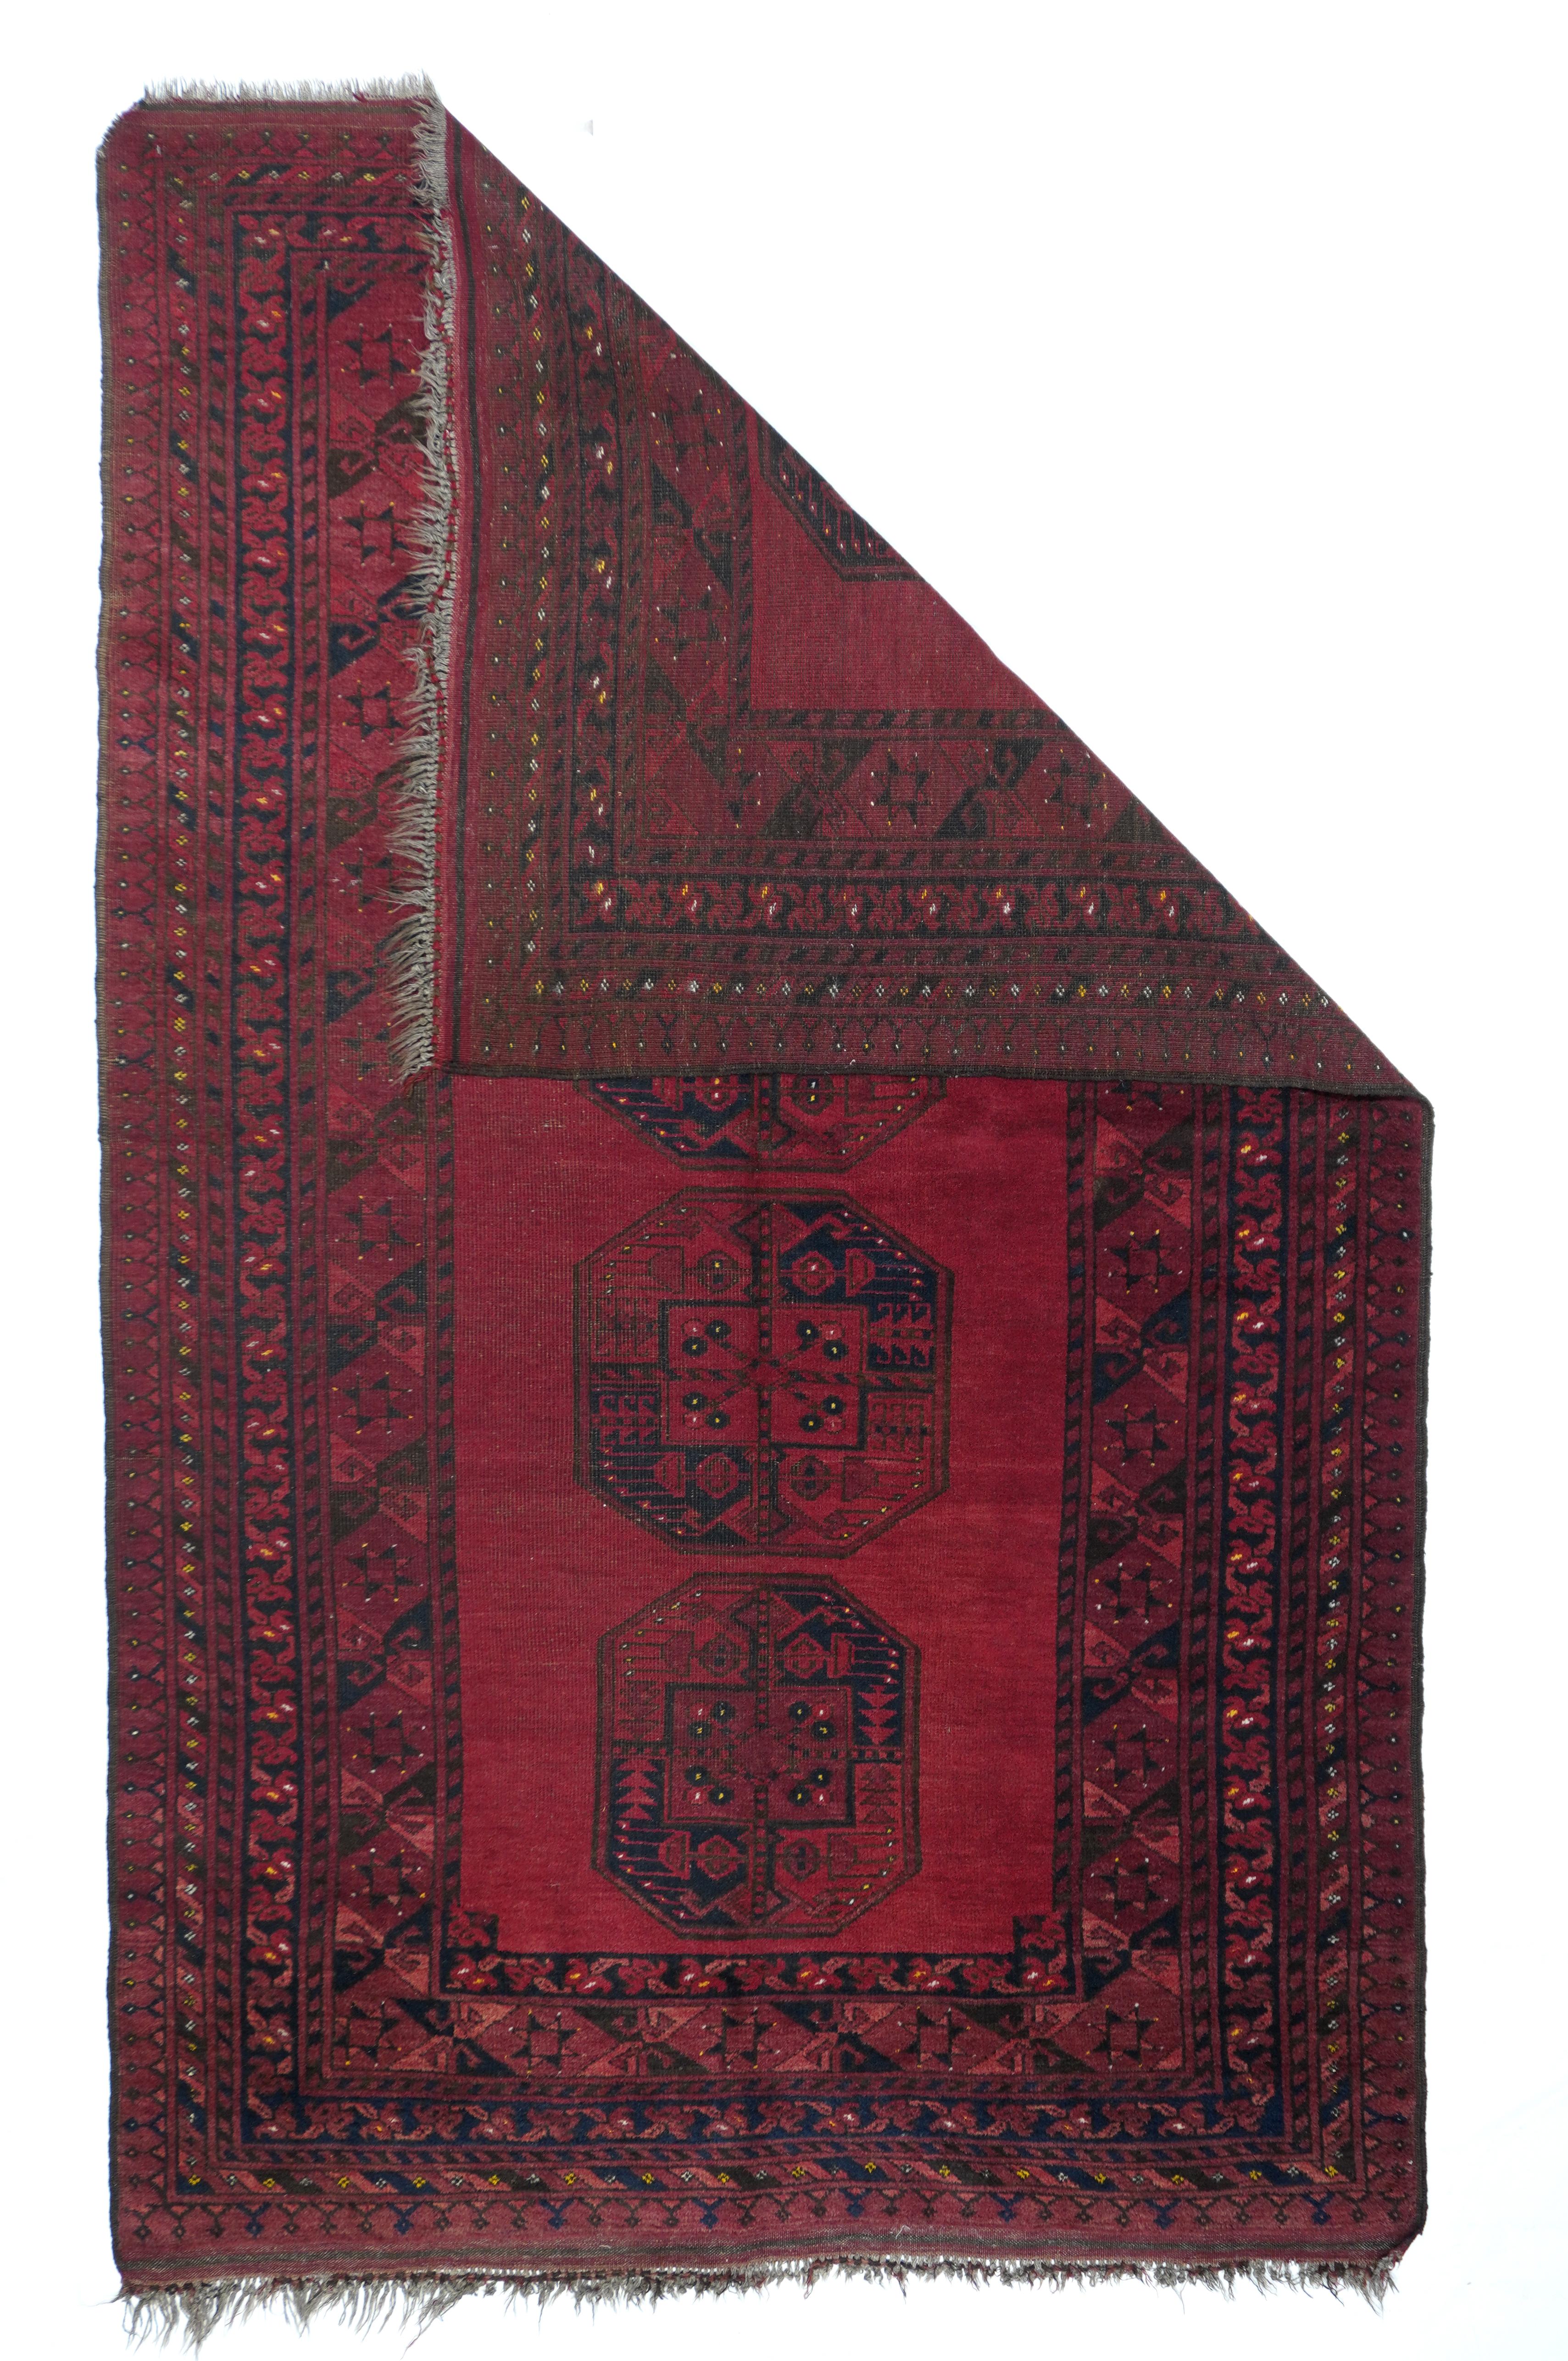 Antique Afghan rug 5' x 8'2''. The red ground of this nomadic scatter is decorated only by four octagonal Turkmen guls quartered in black and red. Saryk style hexagon/star and X main border. Outermost triangle turret border. All wool construction,